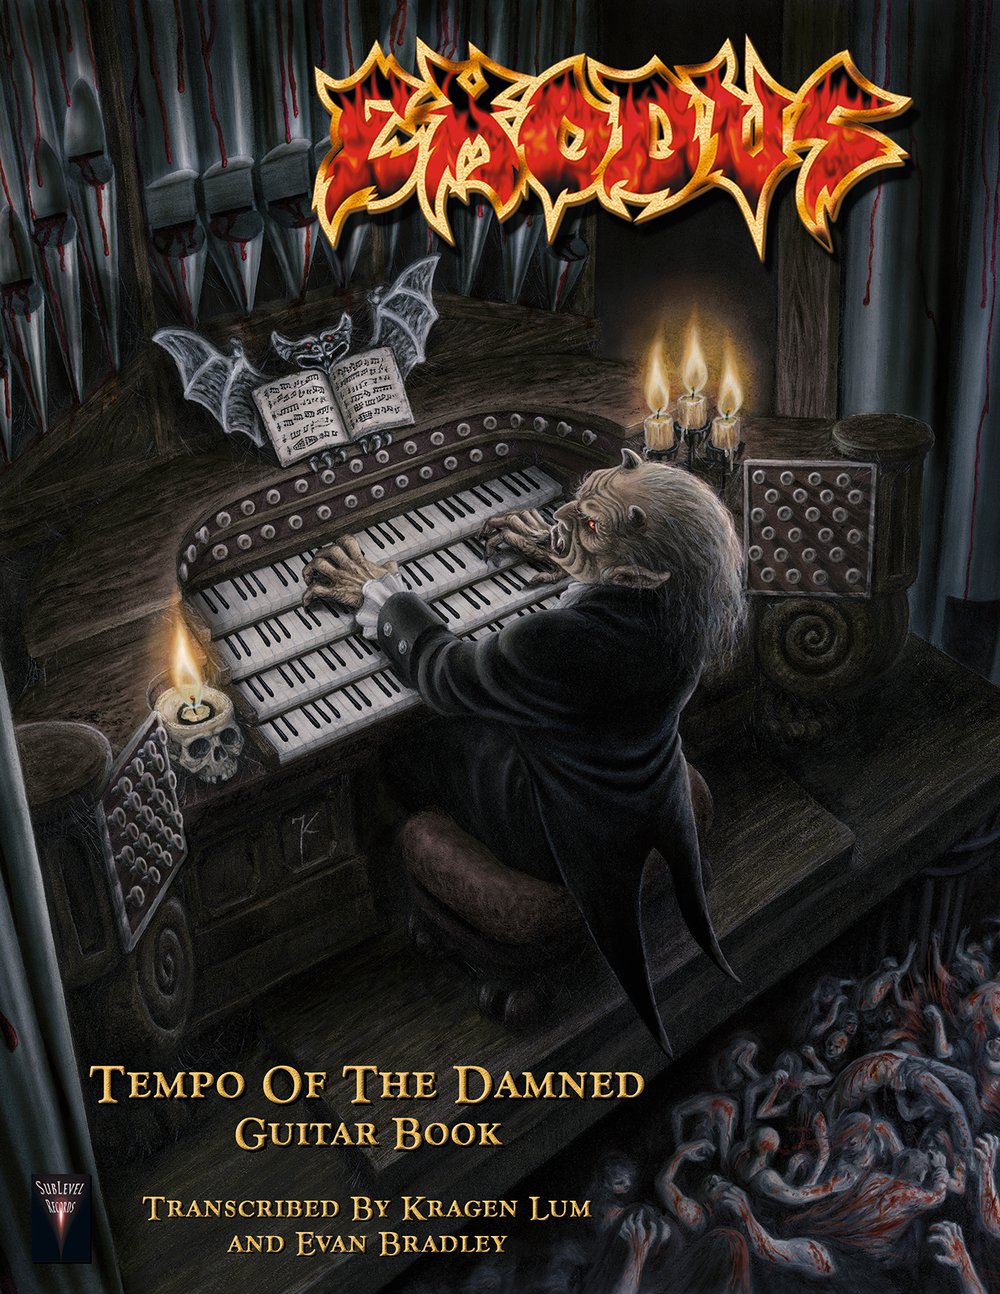 Exodus - Tempo Of The Damned Guitar Book (Deluxe Print Edition + Digital Copy)